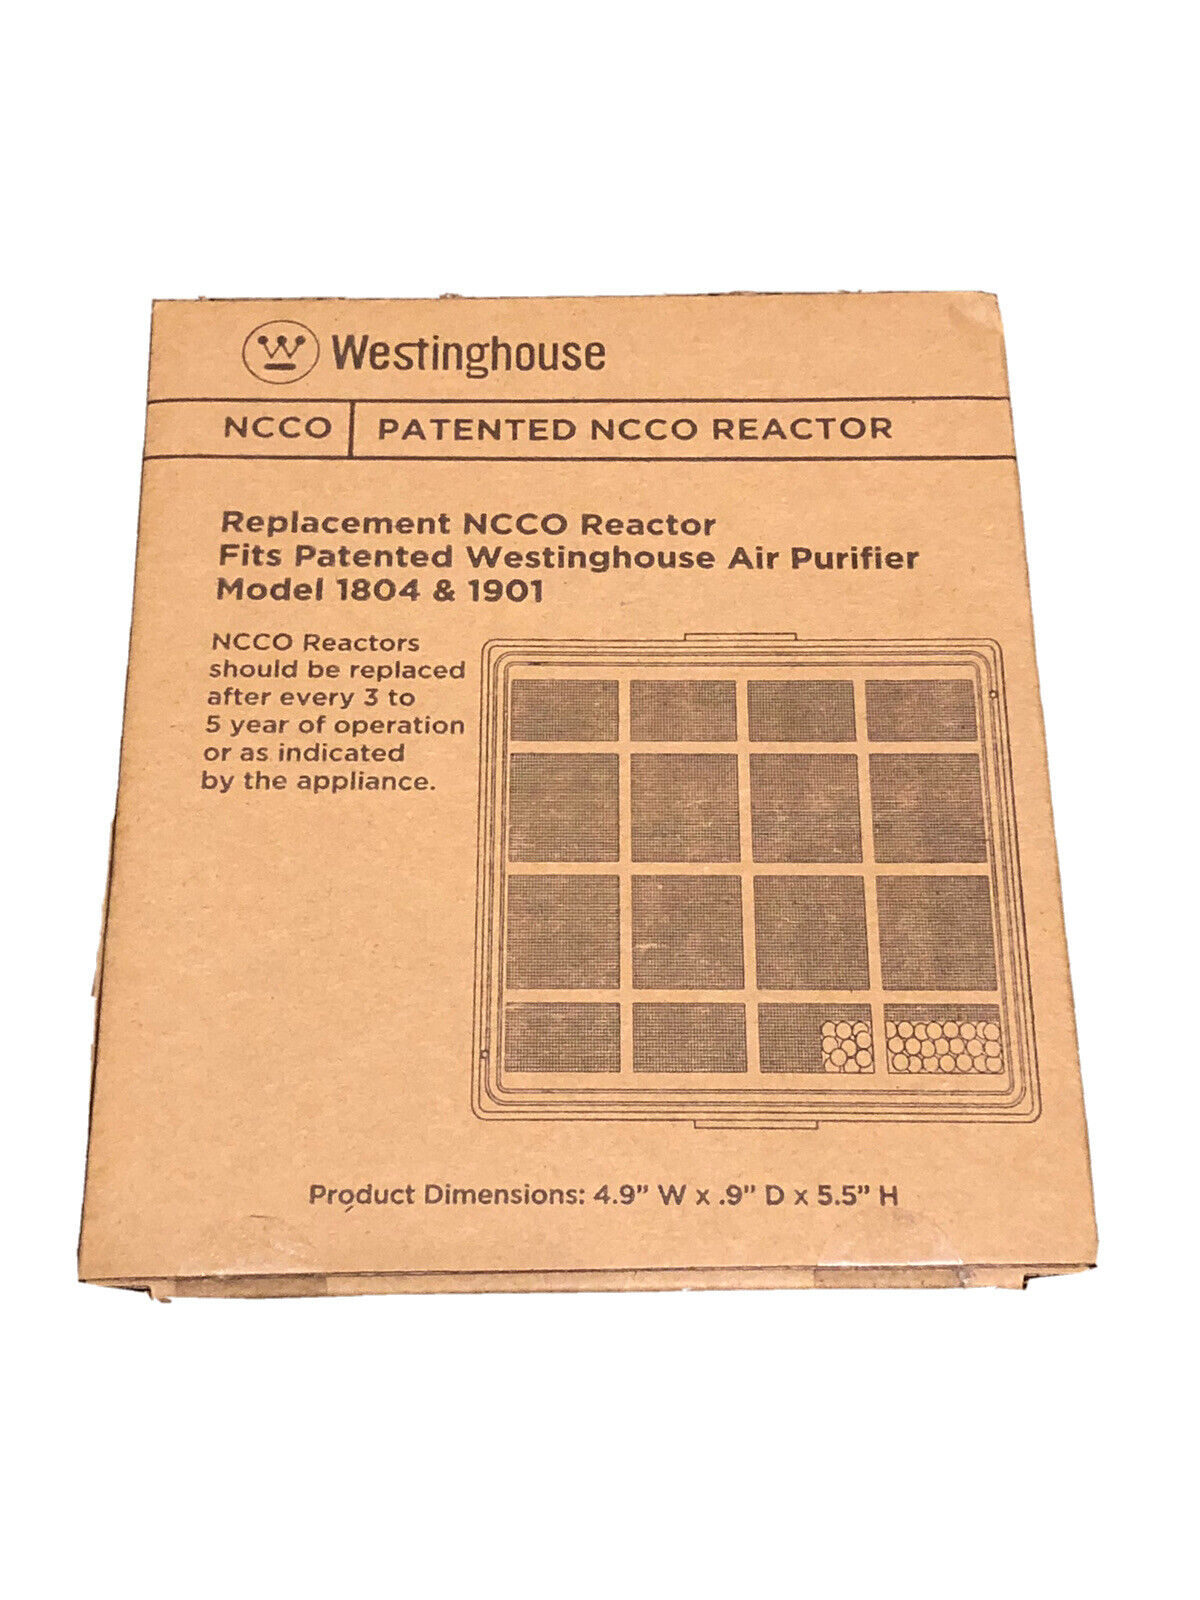 New Sealed Westinghouse Replacement NCCO Reactor for 1804 1901